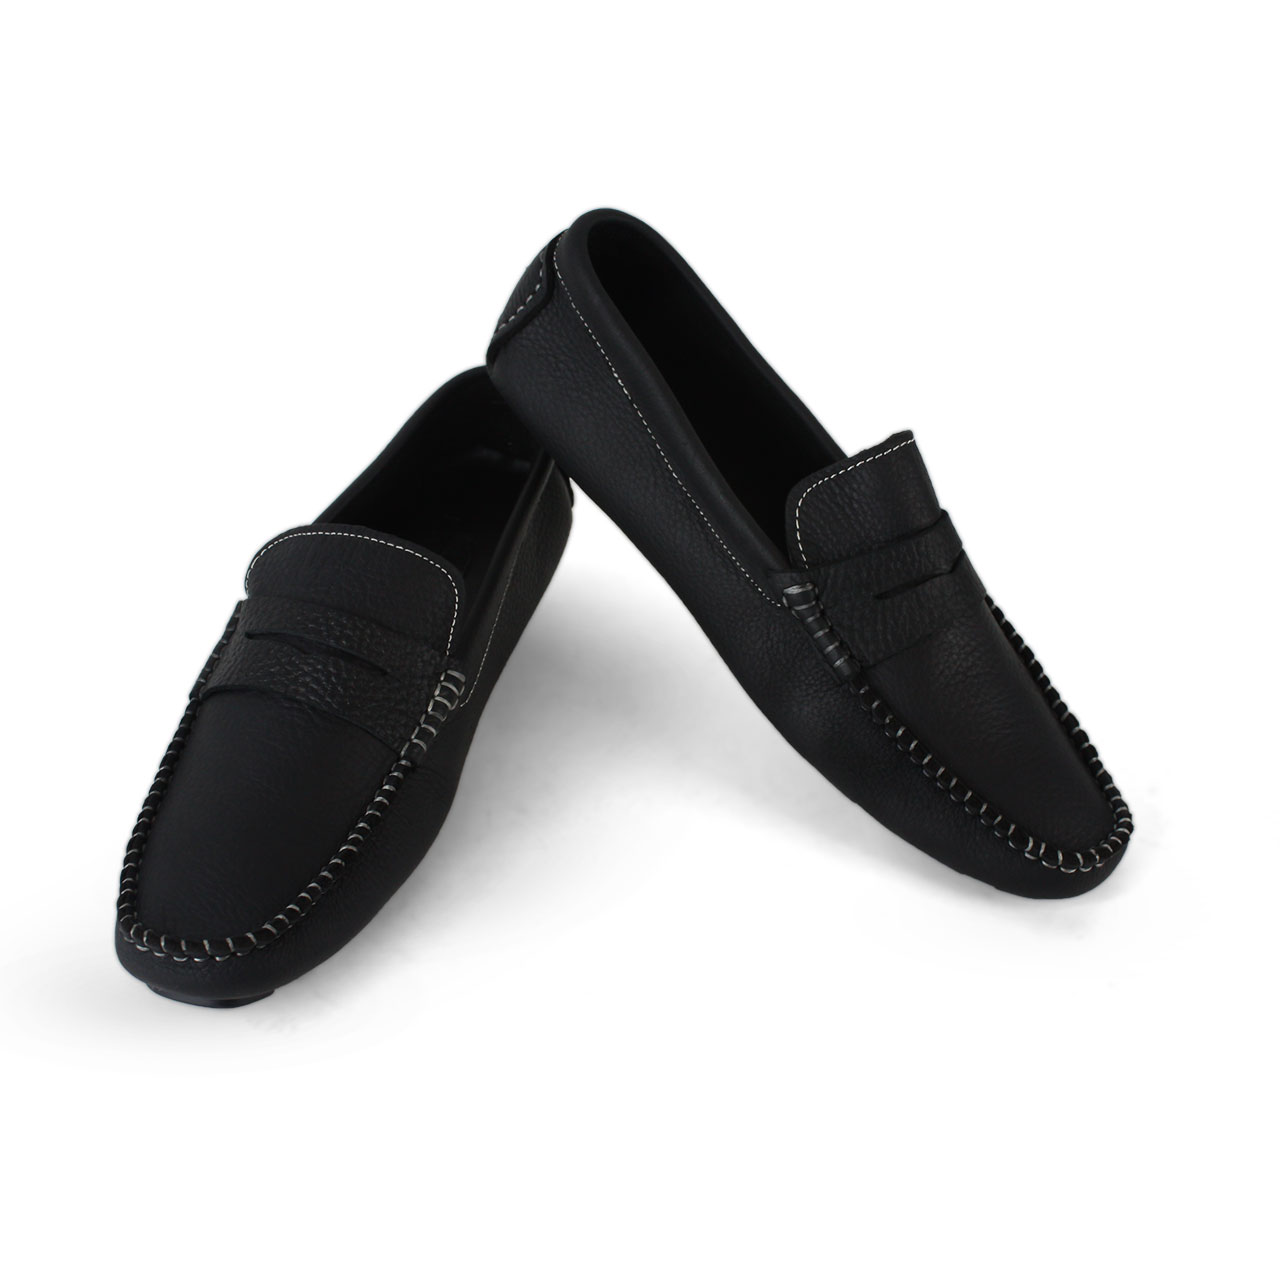 Suede Black Loafers Mens Penny Loafer With Heel Flats Slip-On Shoes